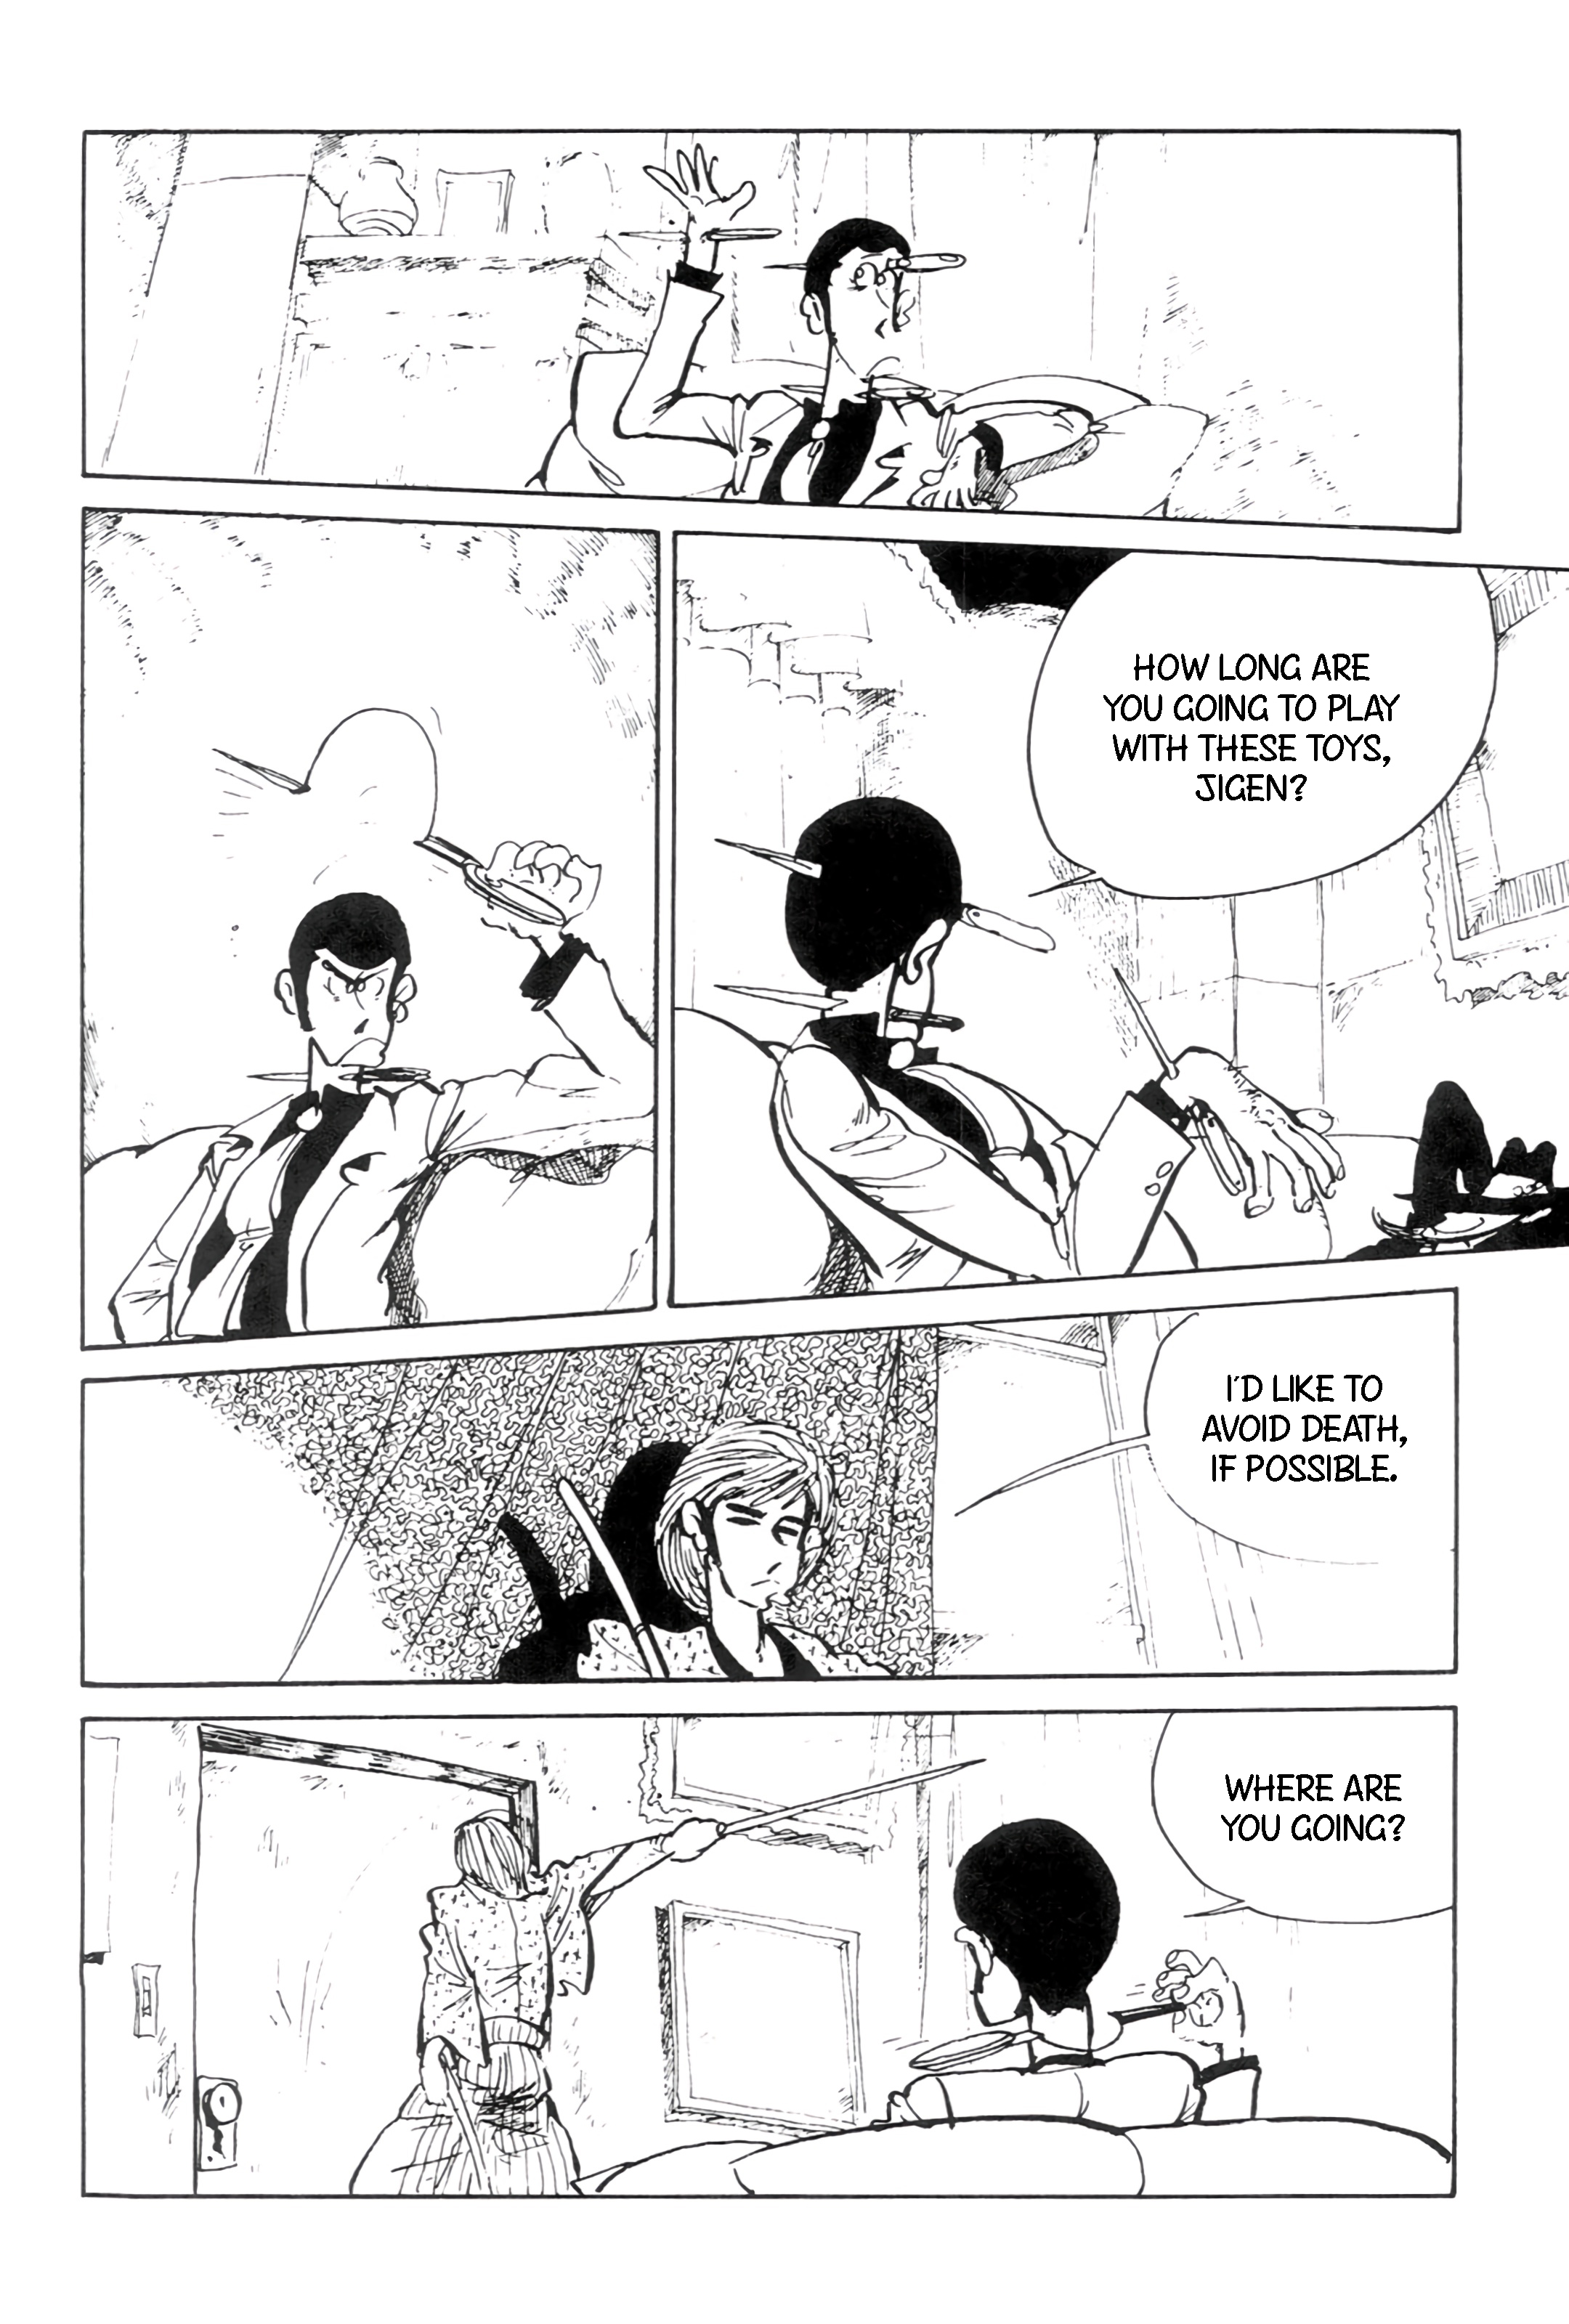 Lupin Iii: World’S Most Wanted - 136 page 6-c7420bce